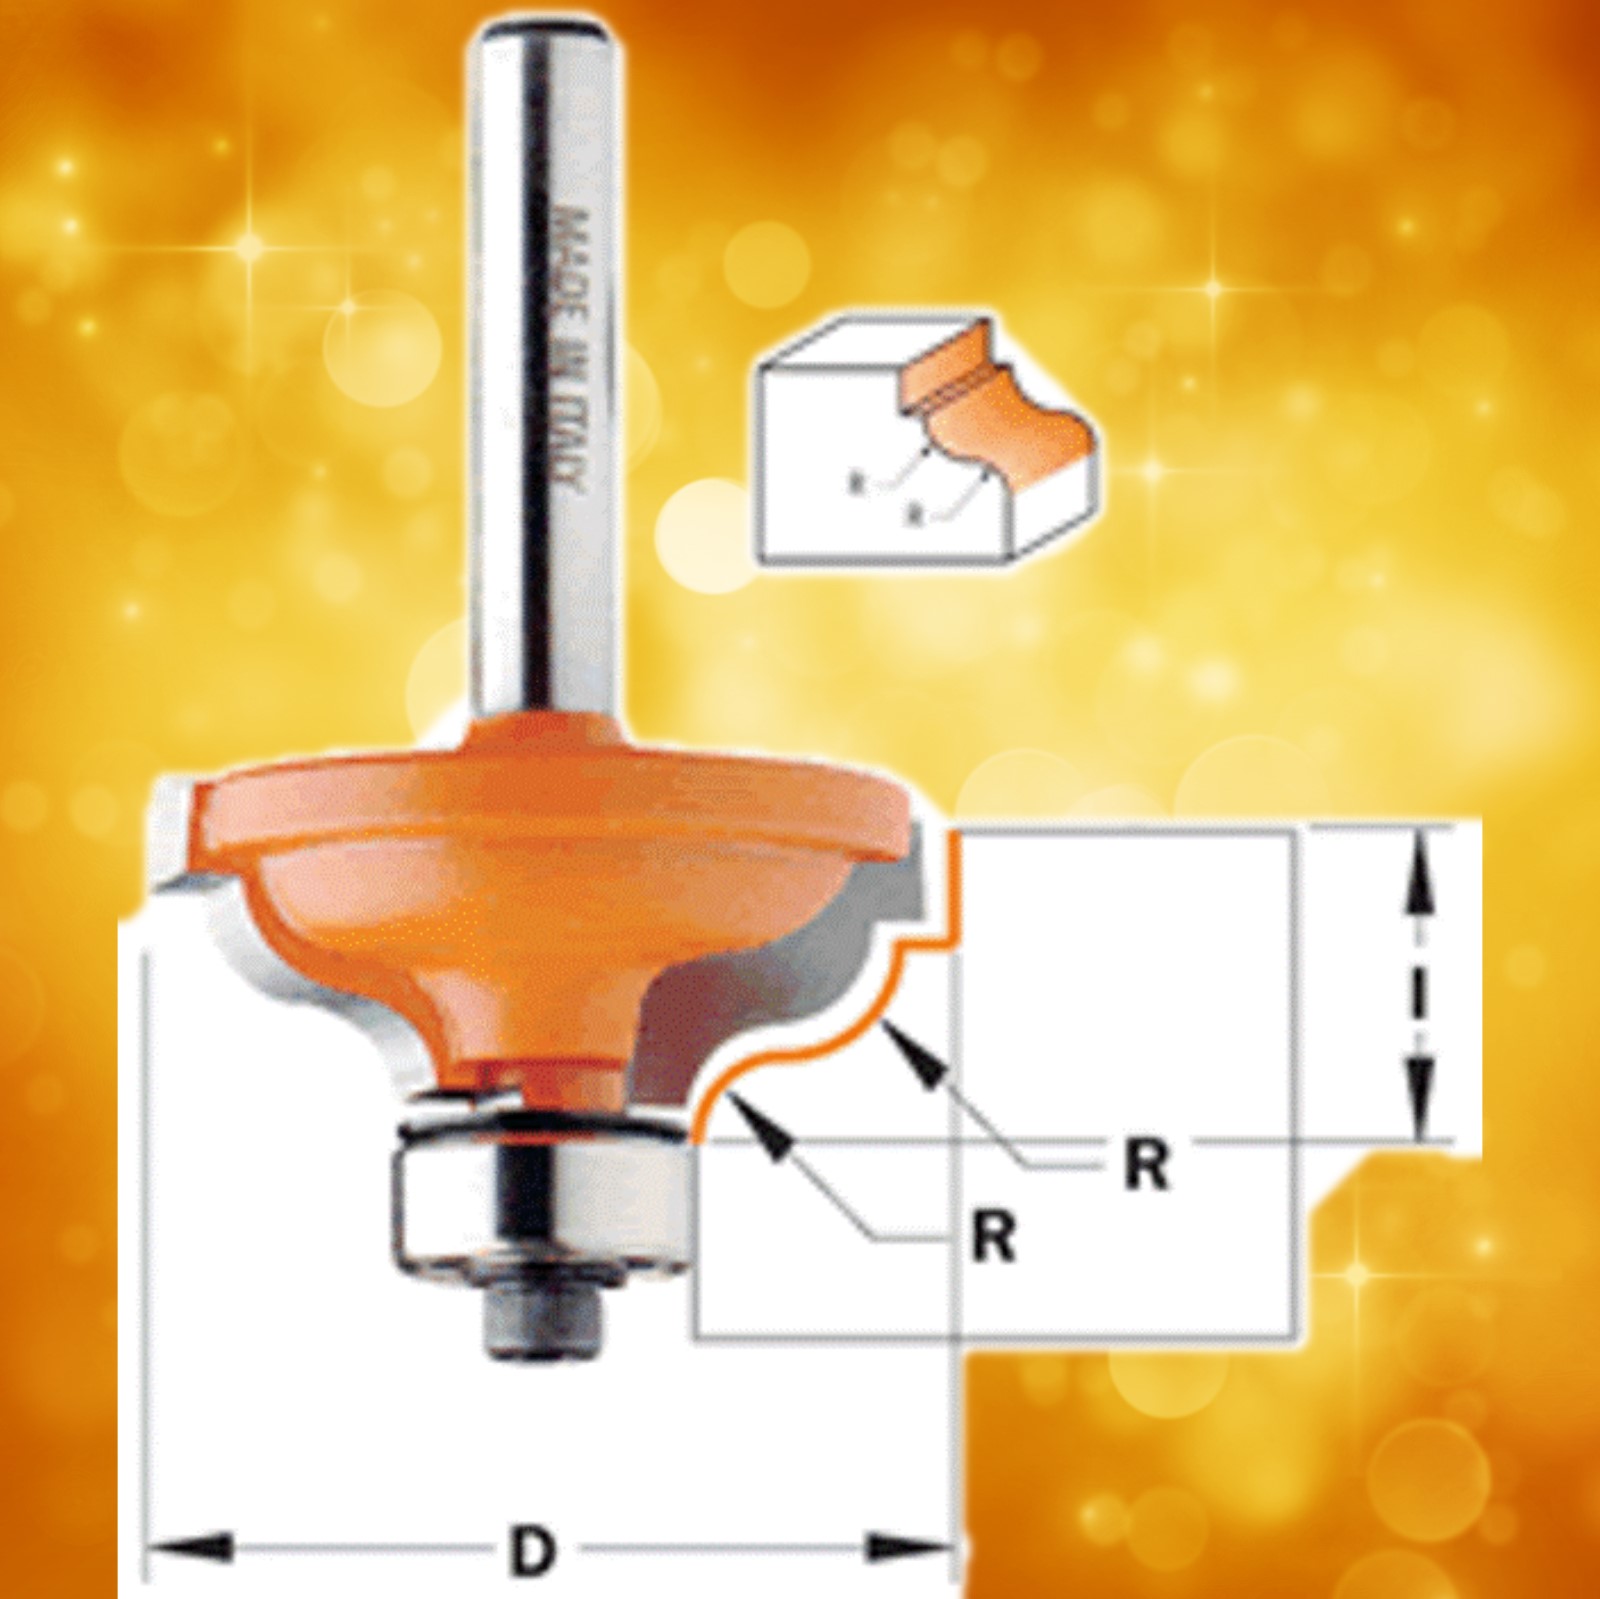 CMT Ogee Router Bit with Fillet Bit 846.325.11 (Series 846) 3/16" - 9/64" radius, 1/4" shank